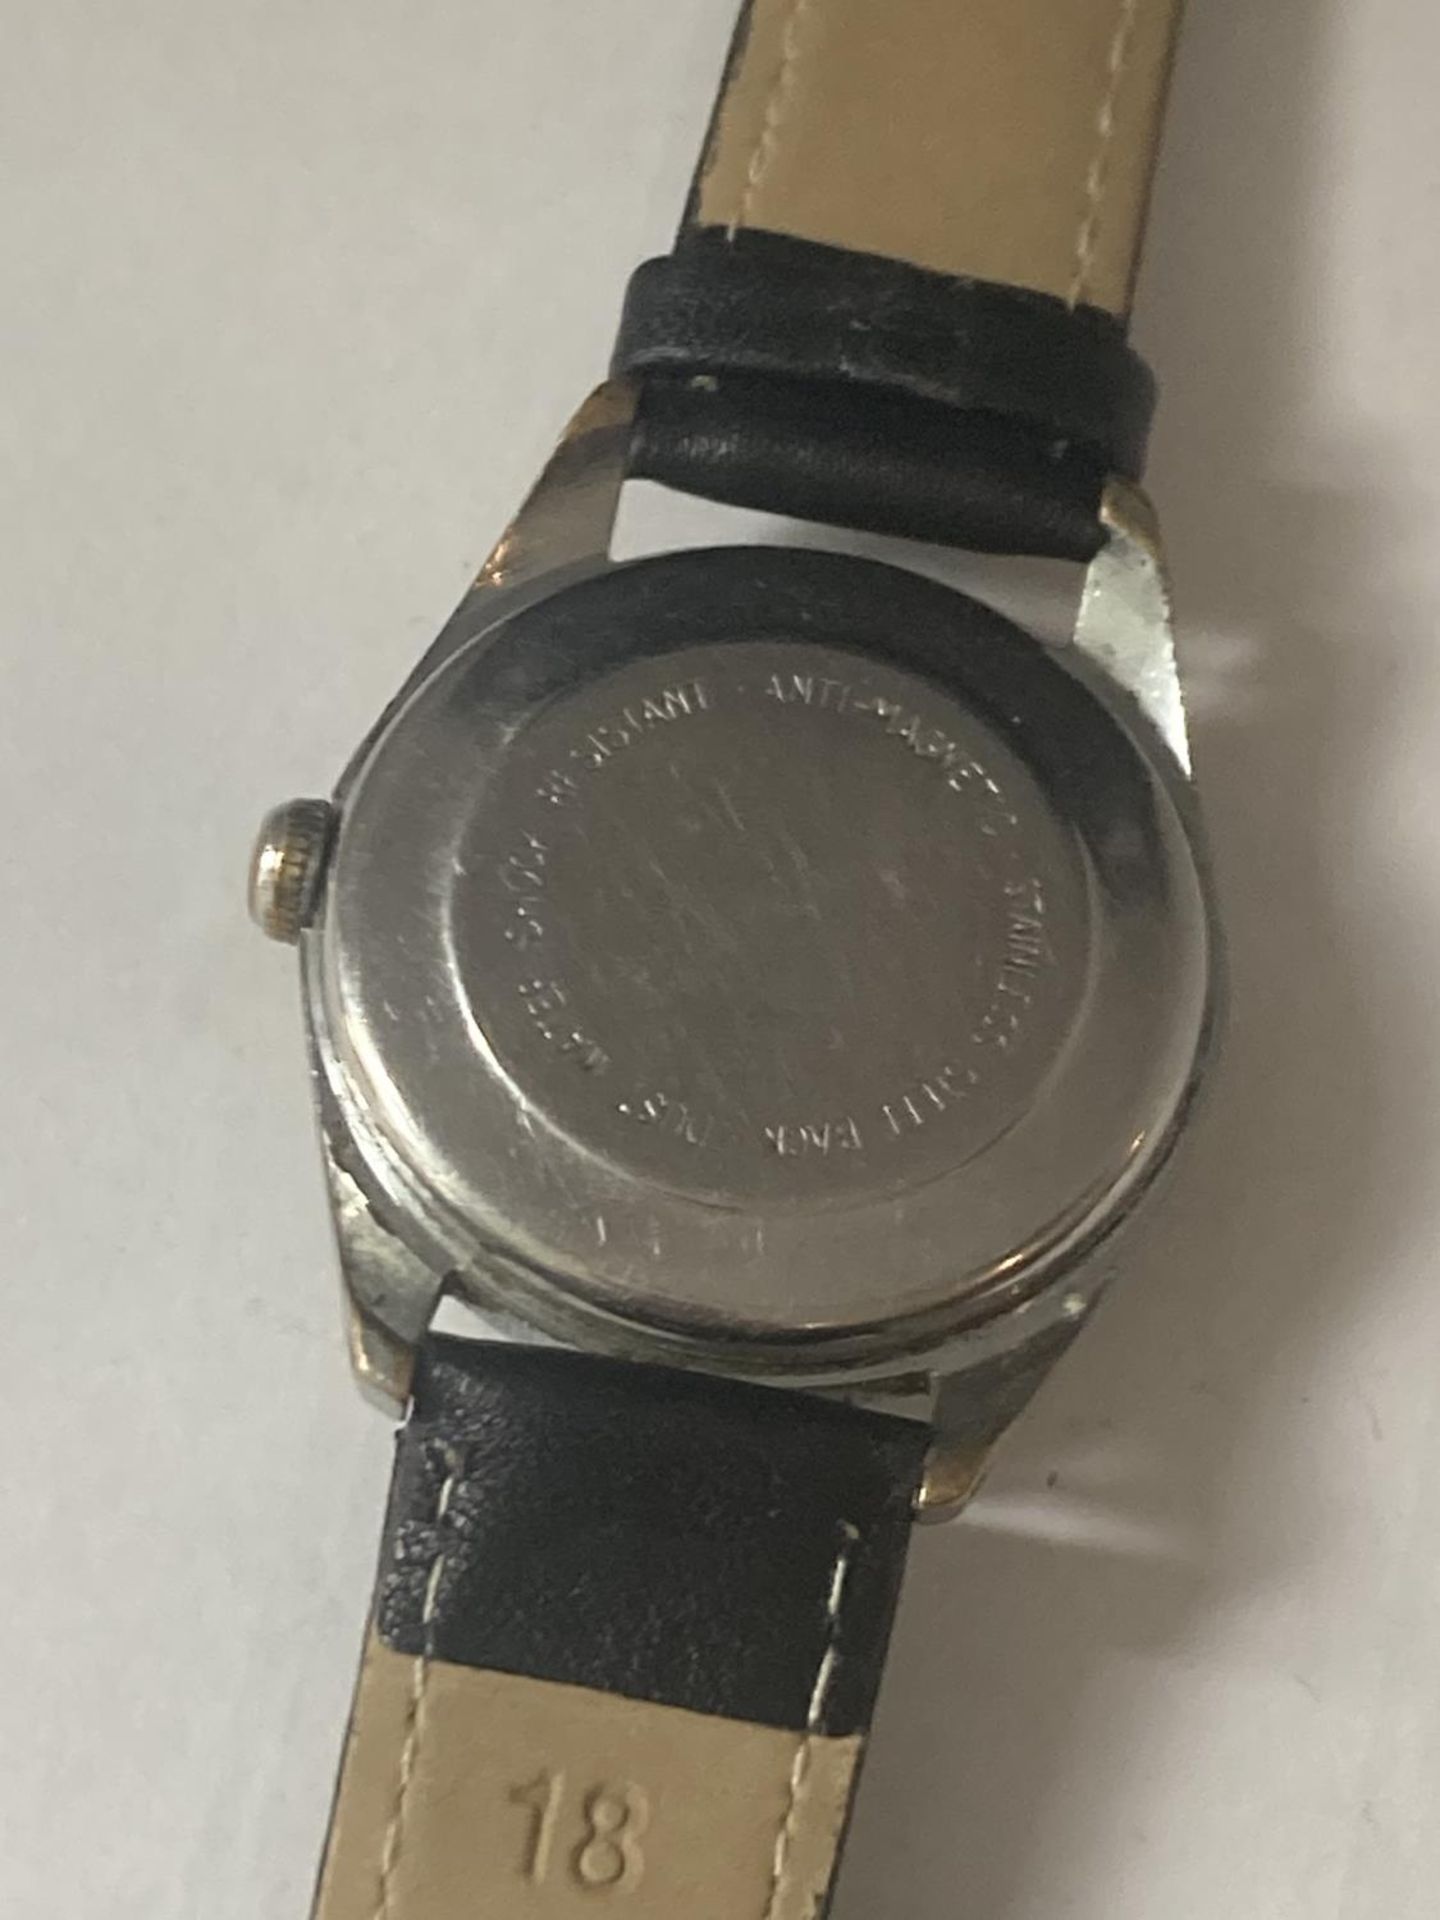 A MILITARY SERVICES WATCH [BELIEVED TO BE IN WORKING ORDER - NO WARRANTY GIVEN ] - Image 6 of 6